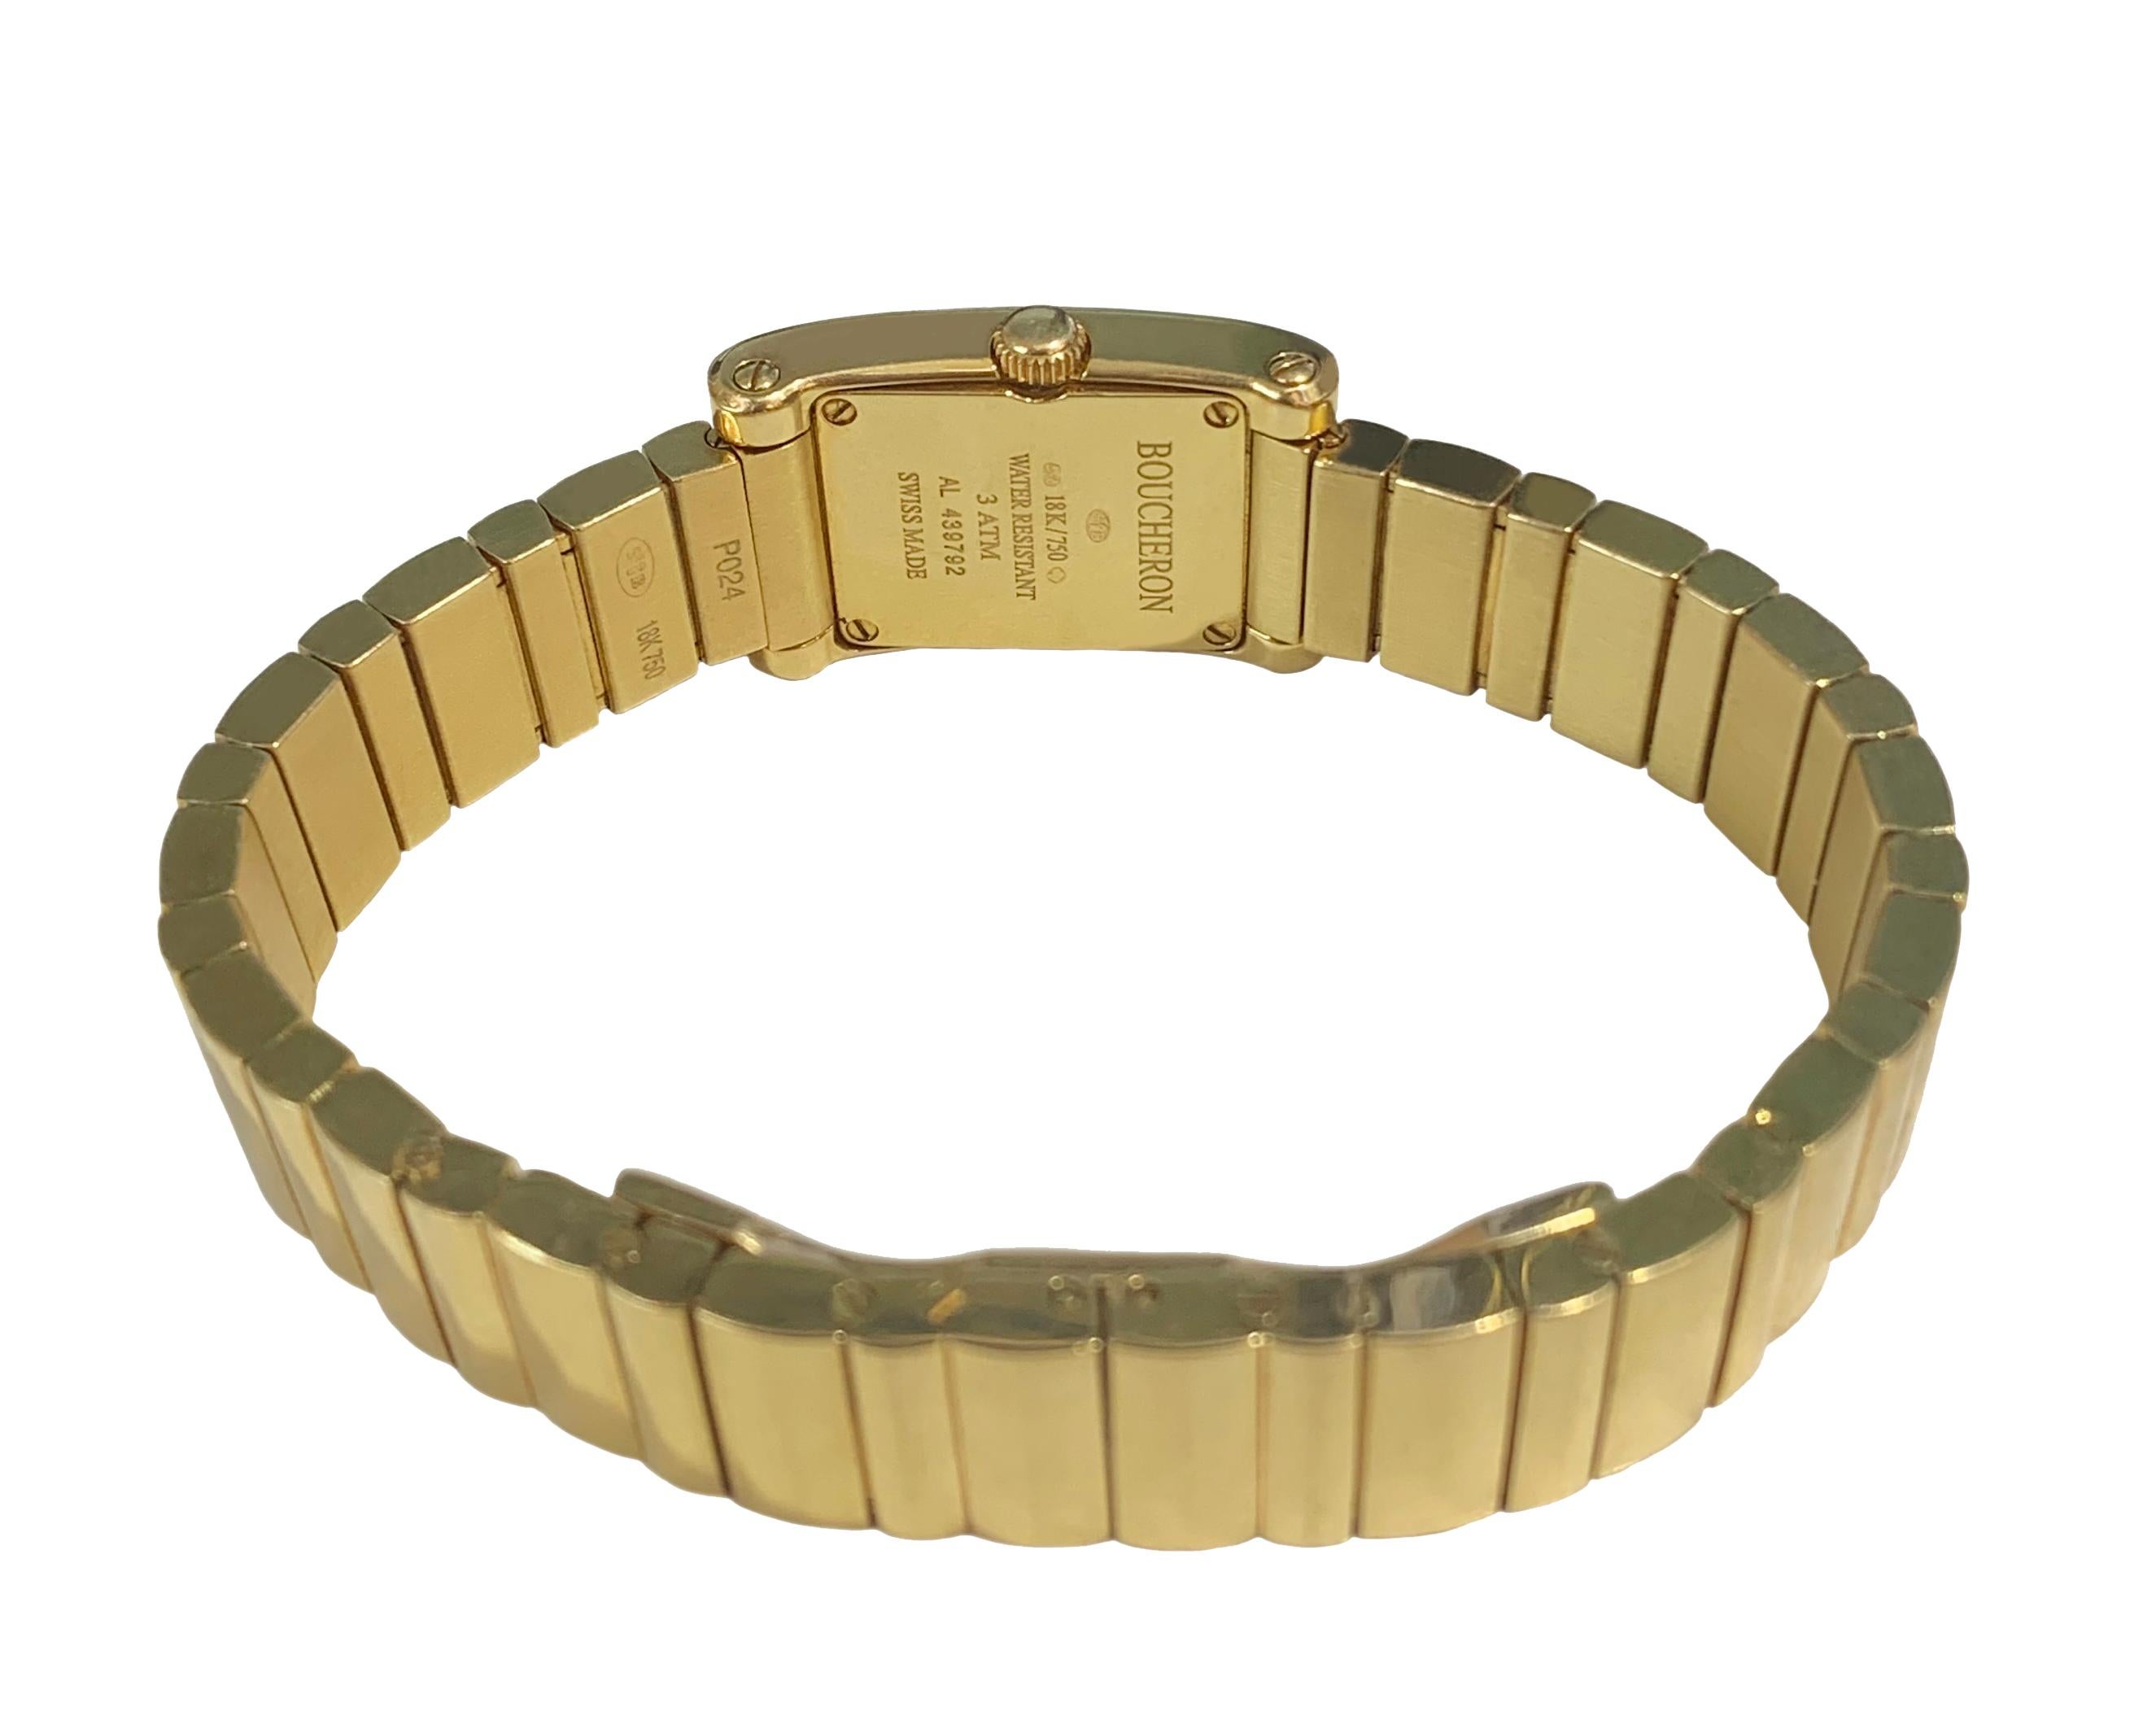 -Mint condition
-18k Yellow Gold
-Case size: 18x27mm
-Case thickness: 5.6mm
-Weight: 87.8gr
-Inner circumference: 6.5